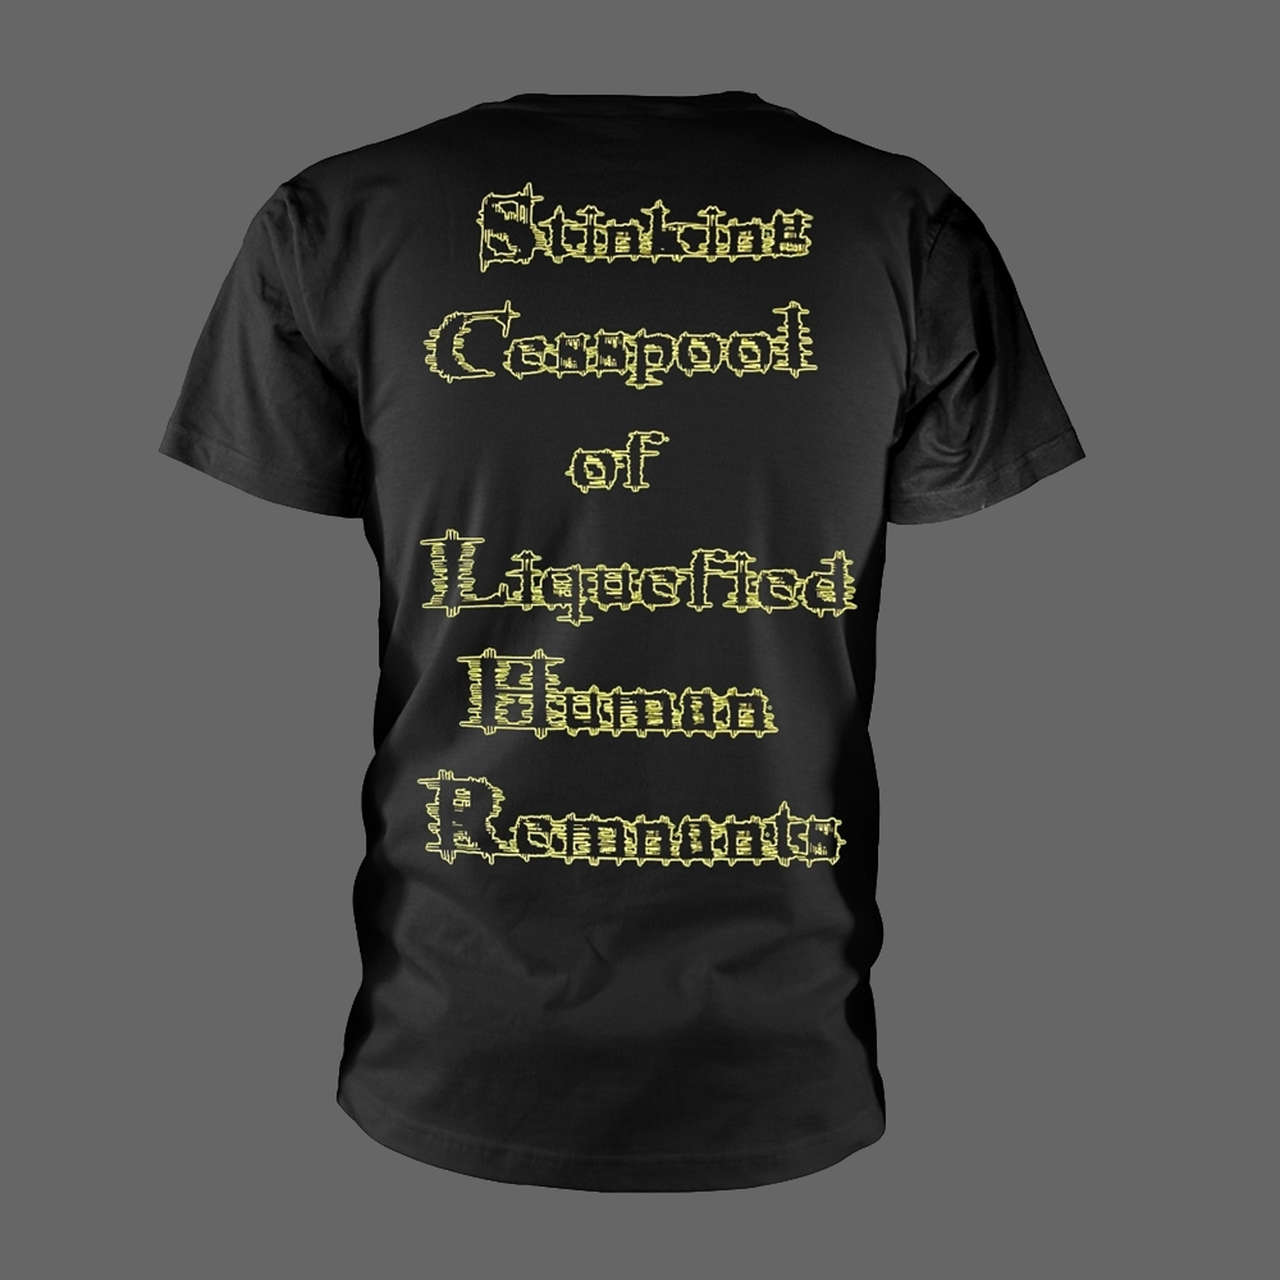 Ingested - Stinking Cesspool of Liquified Human Remnants (T-Shirt)